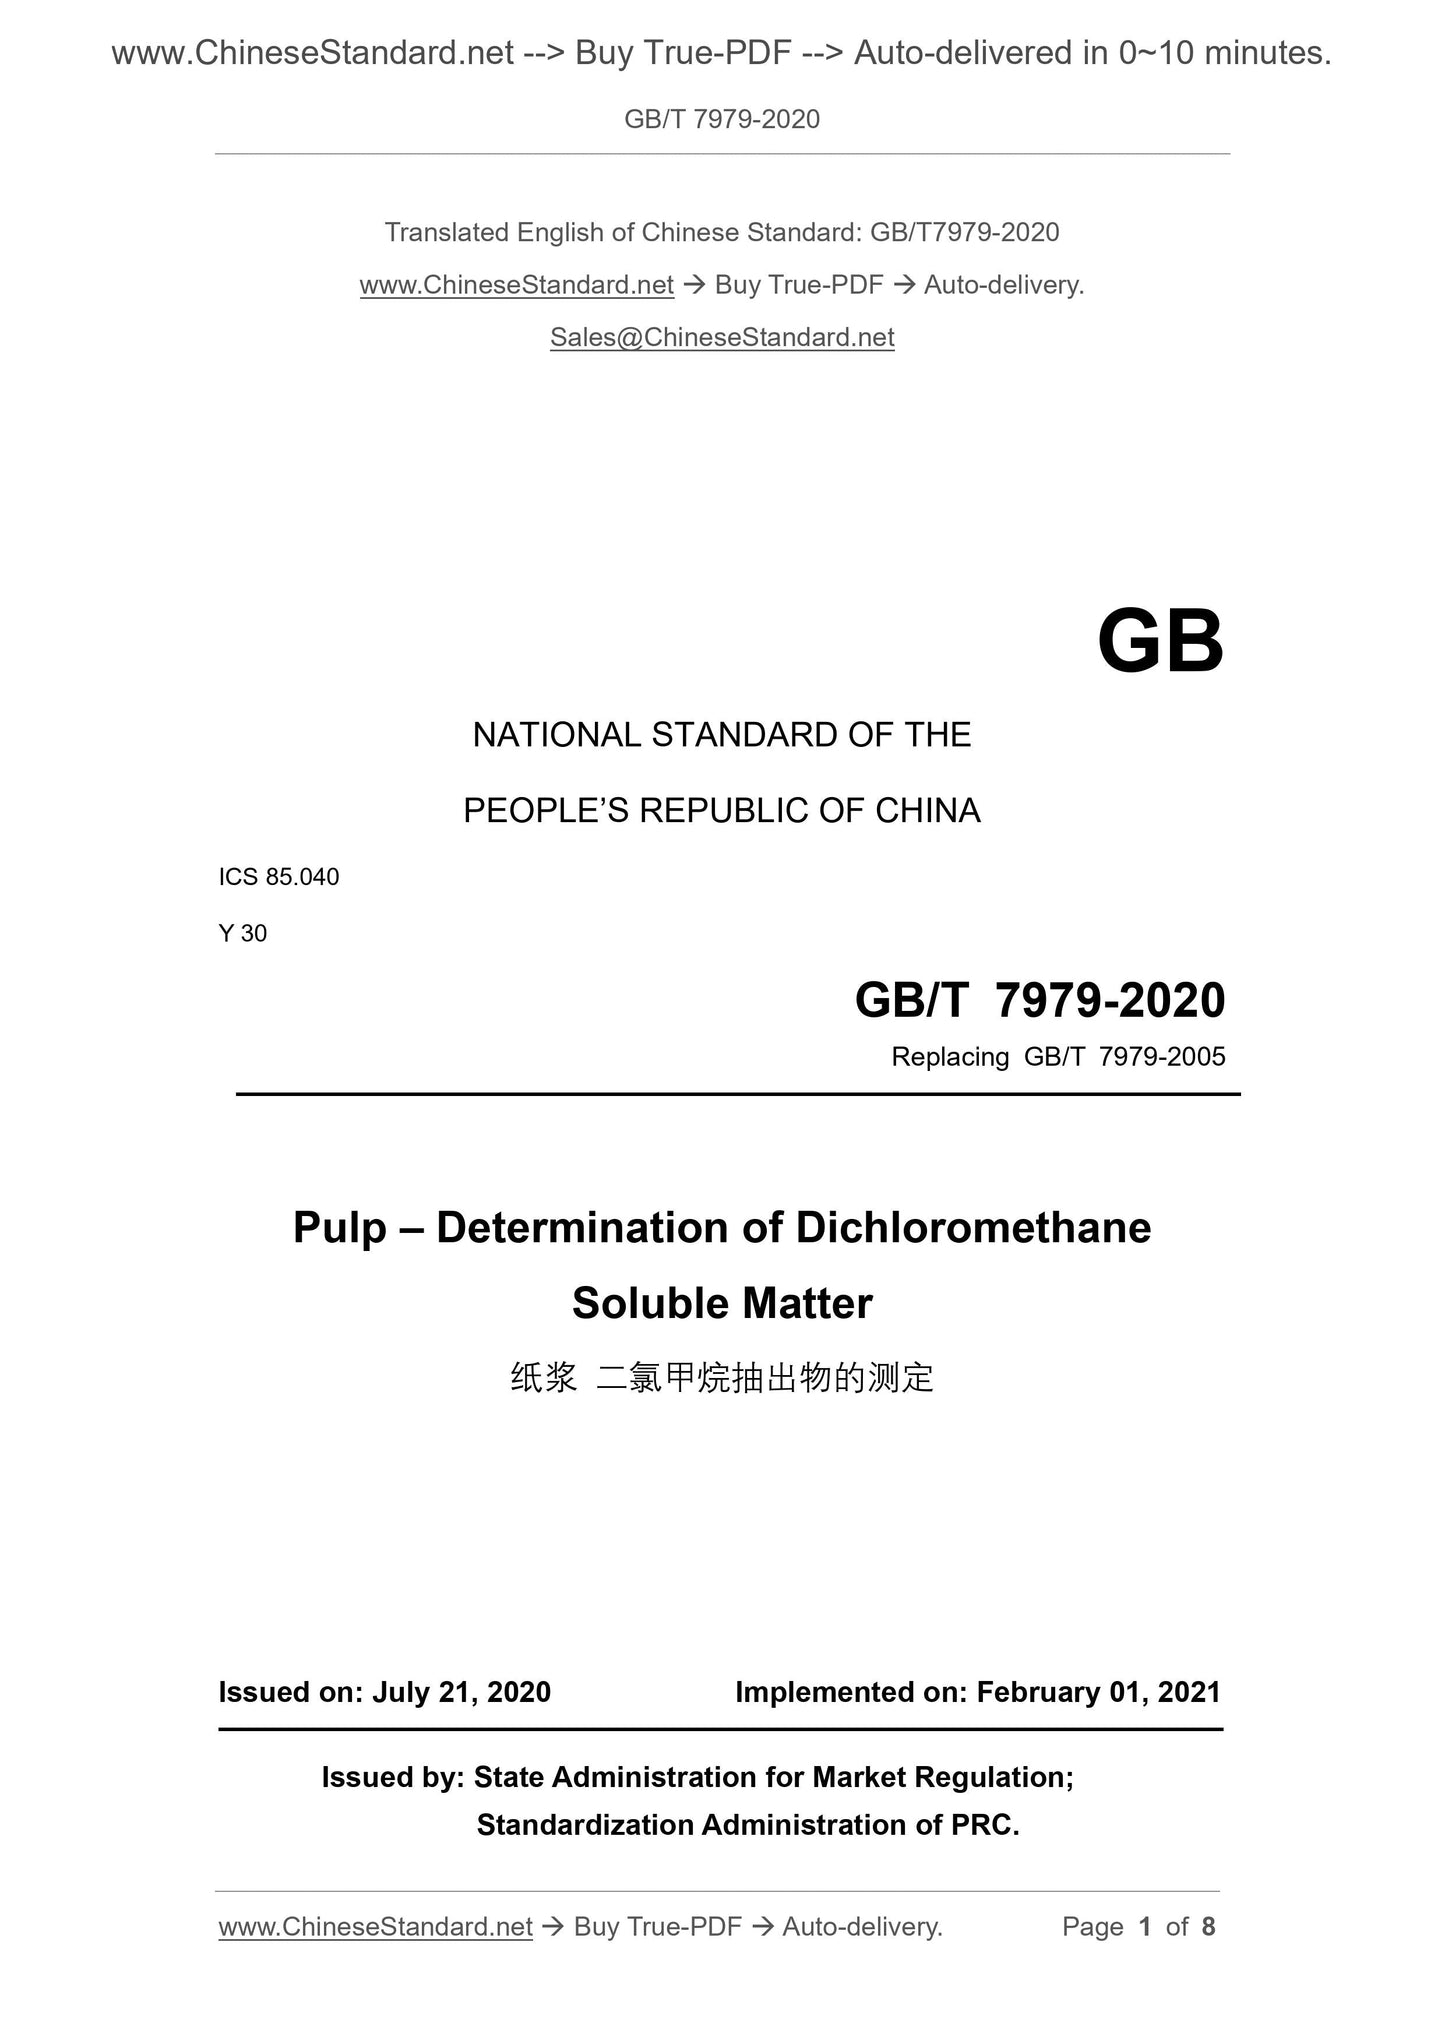 GB/T 7979-2020 Page 1